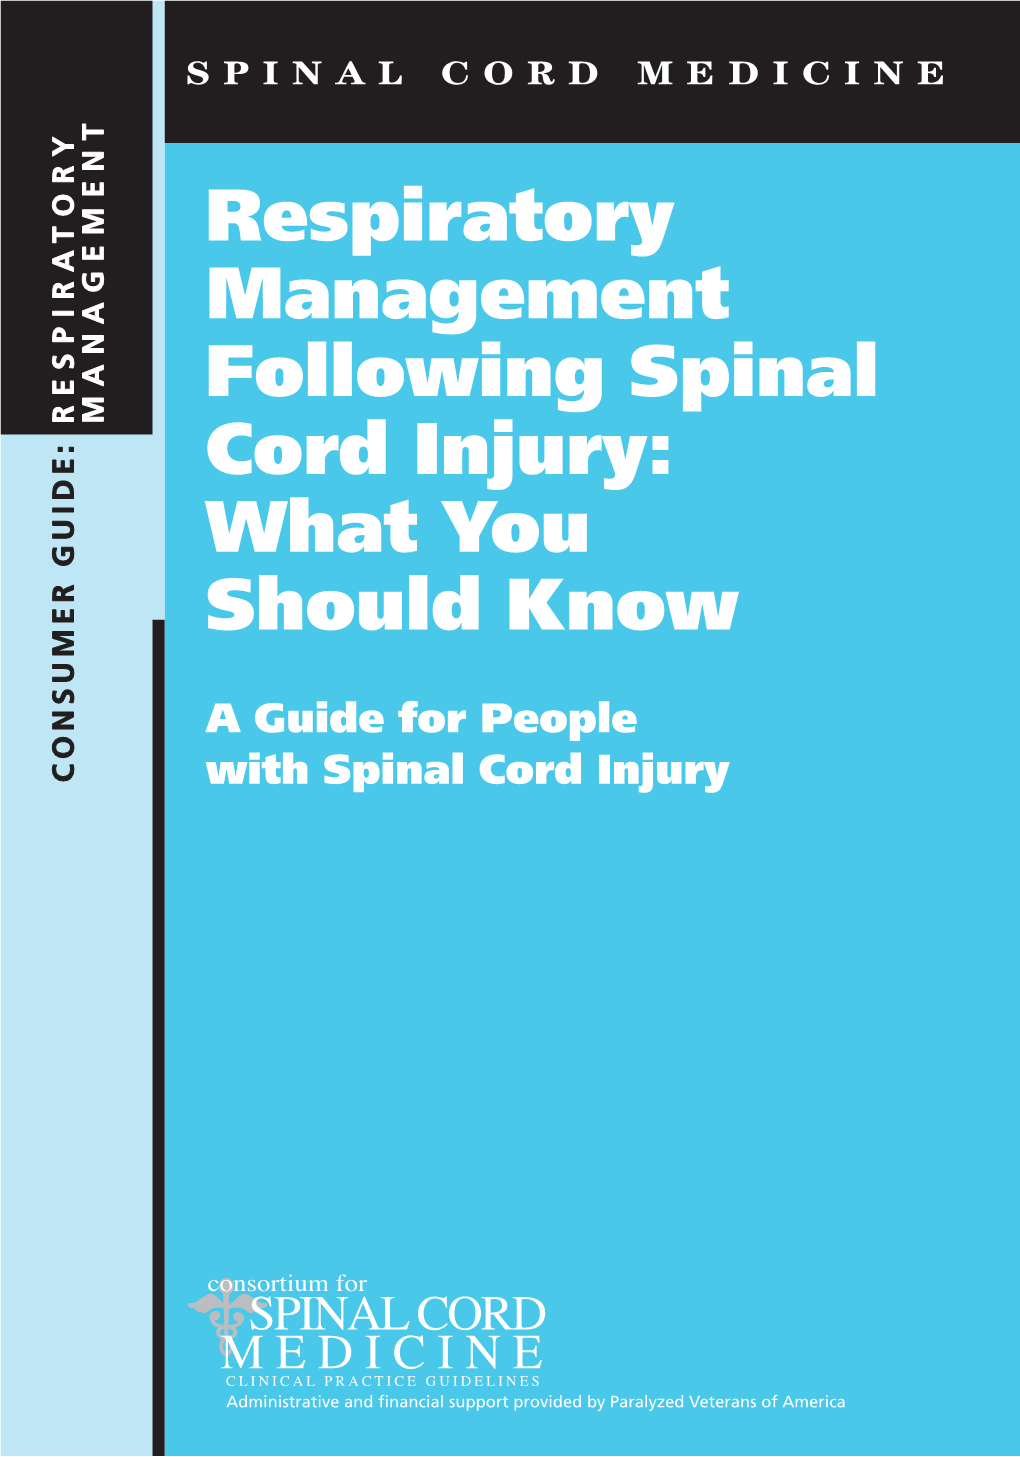 Respiratory Management Following Spinal Cord Injury: What You Should Know